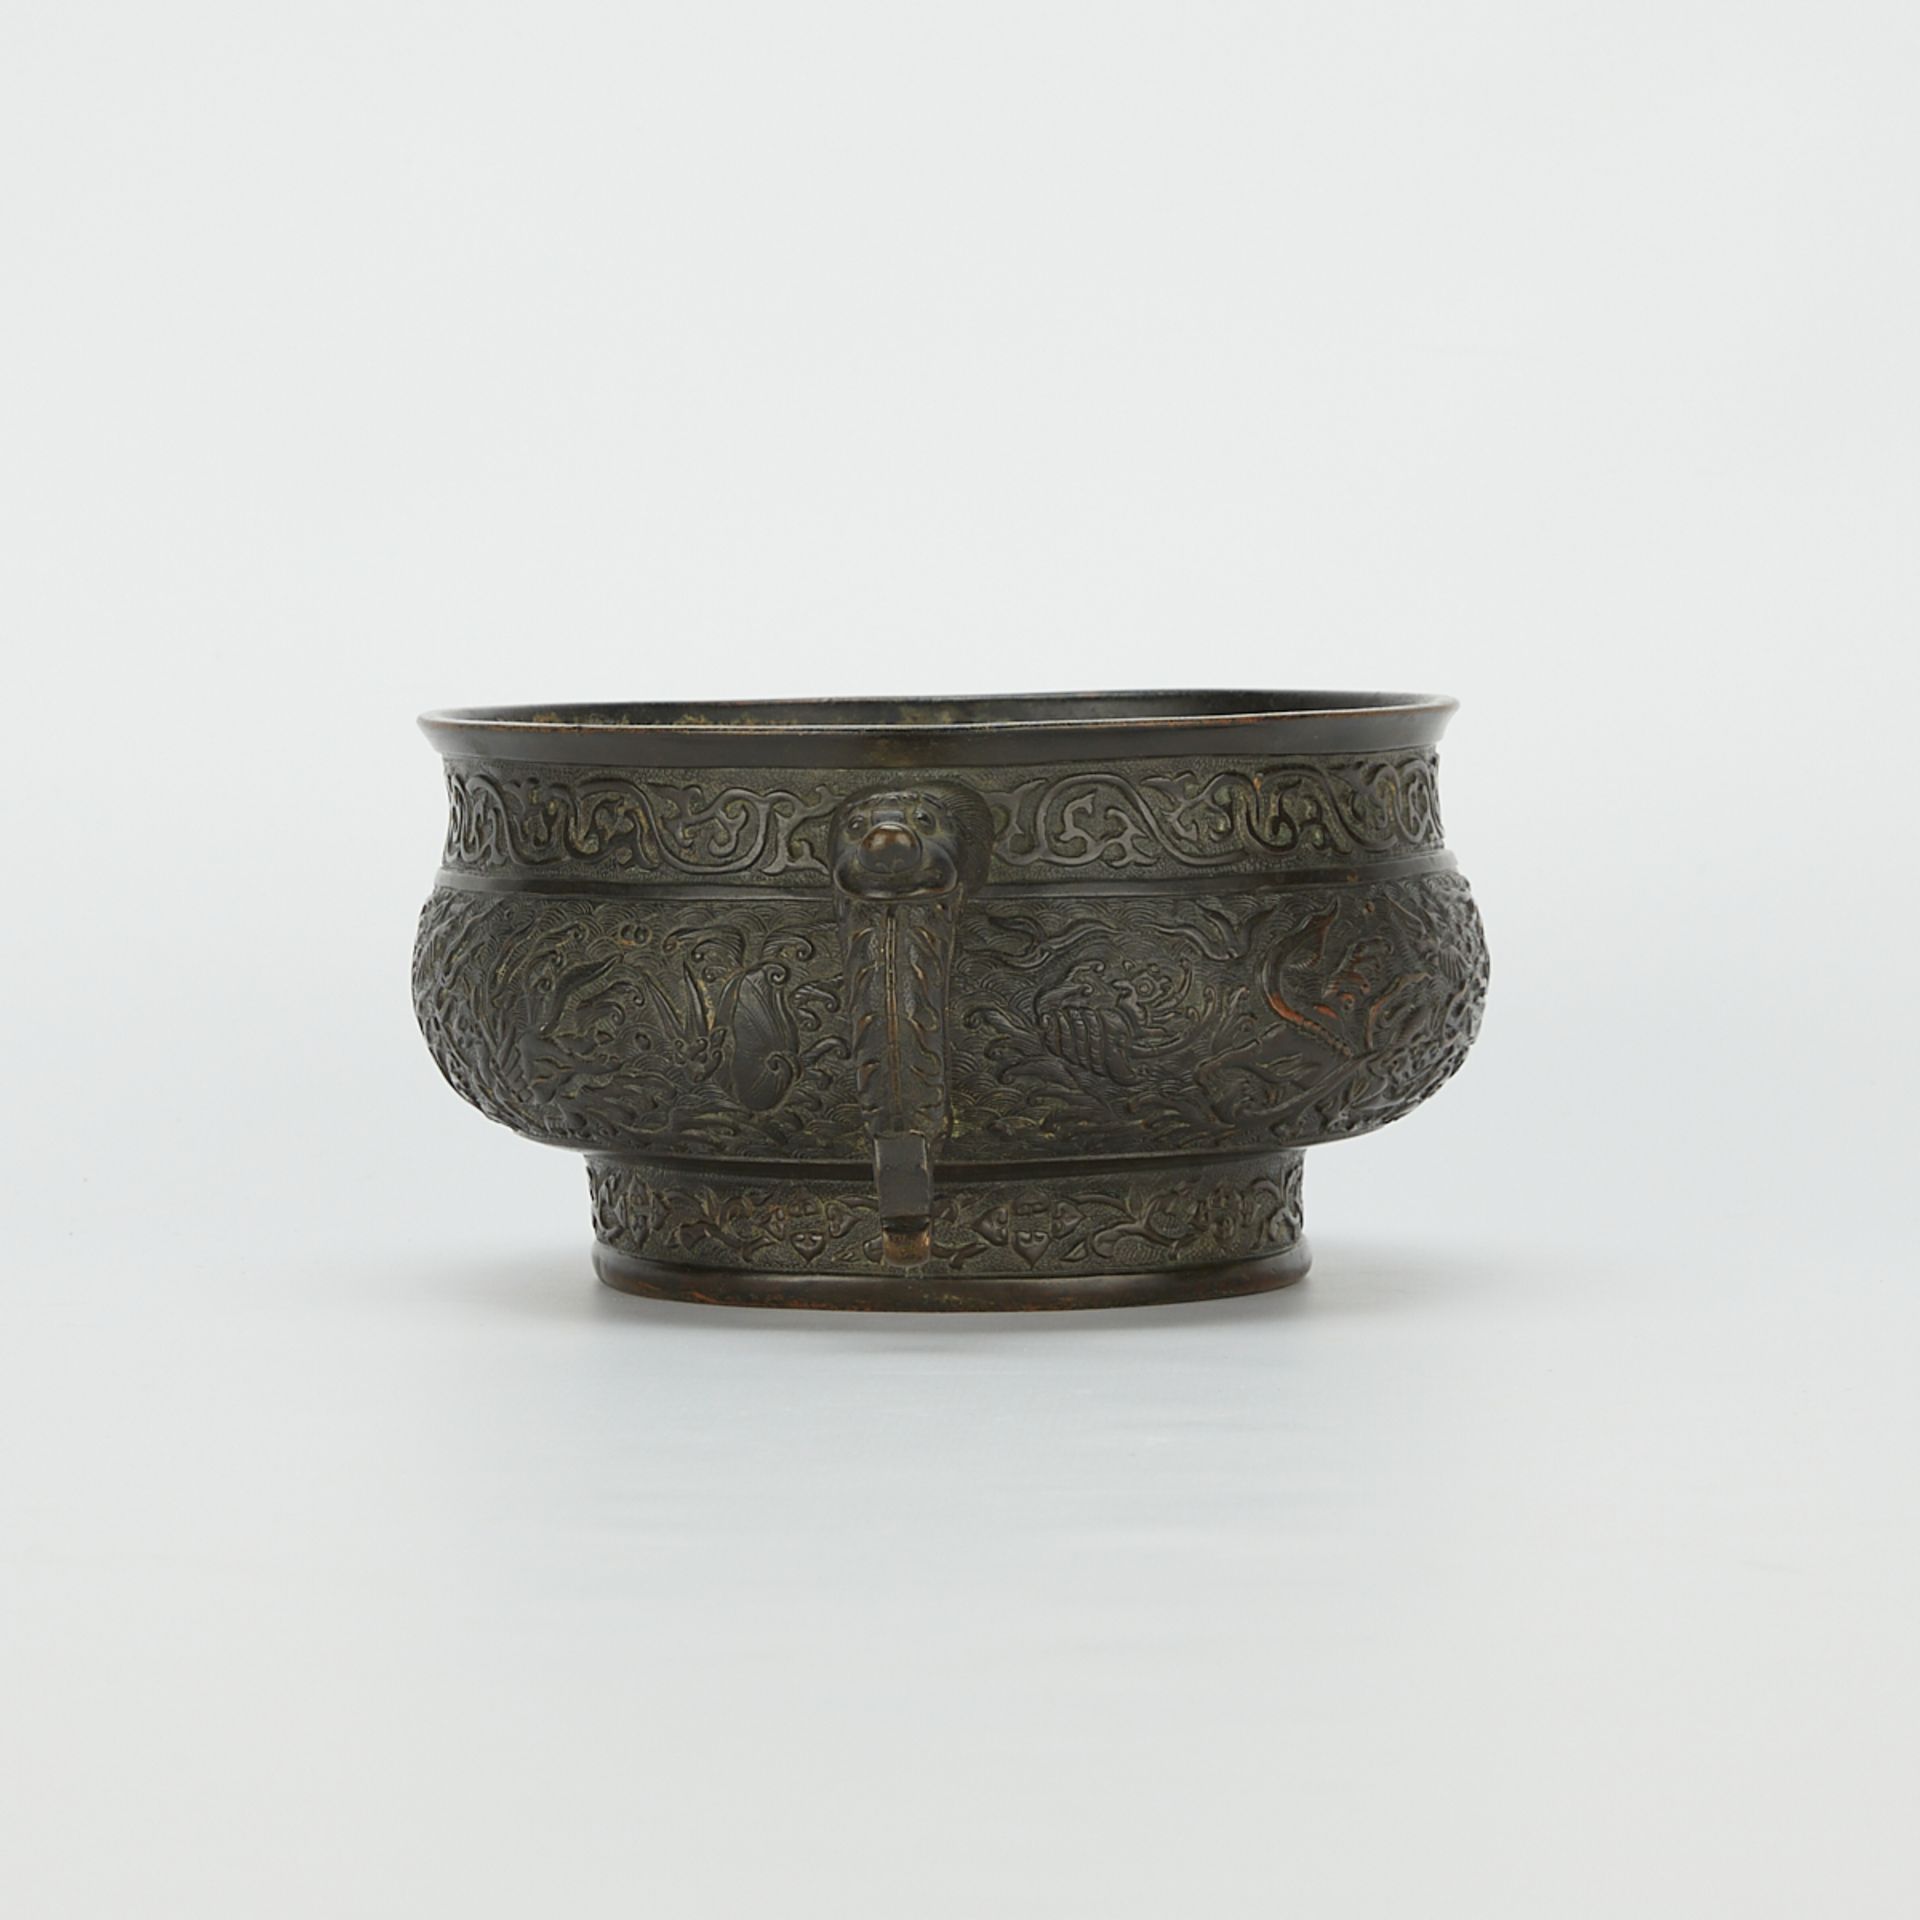 17th c. Chinese Bronze Mythical Beast Censer - Image 4 of 12